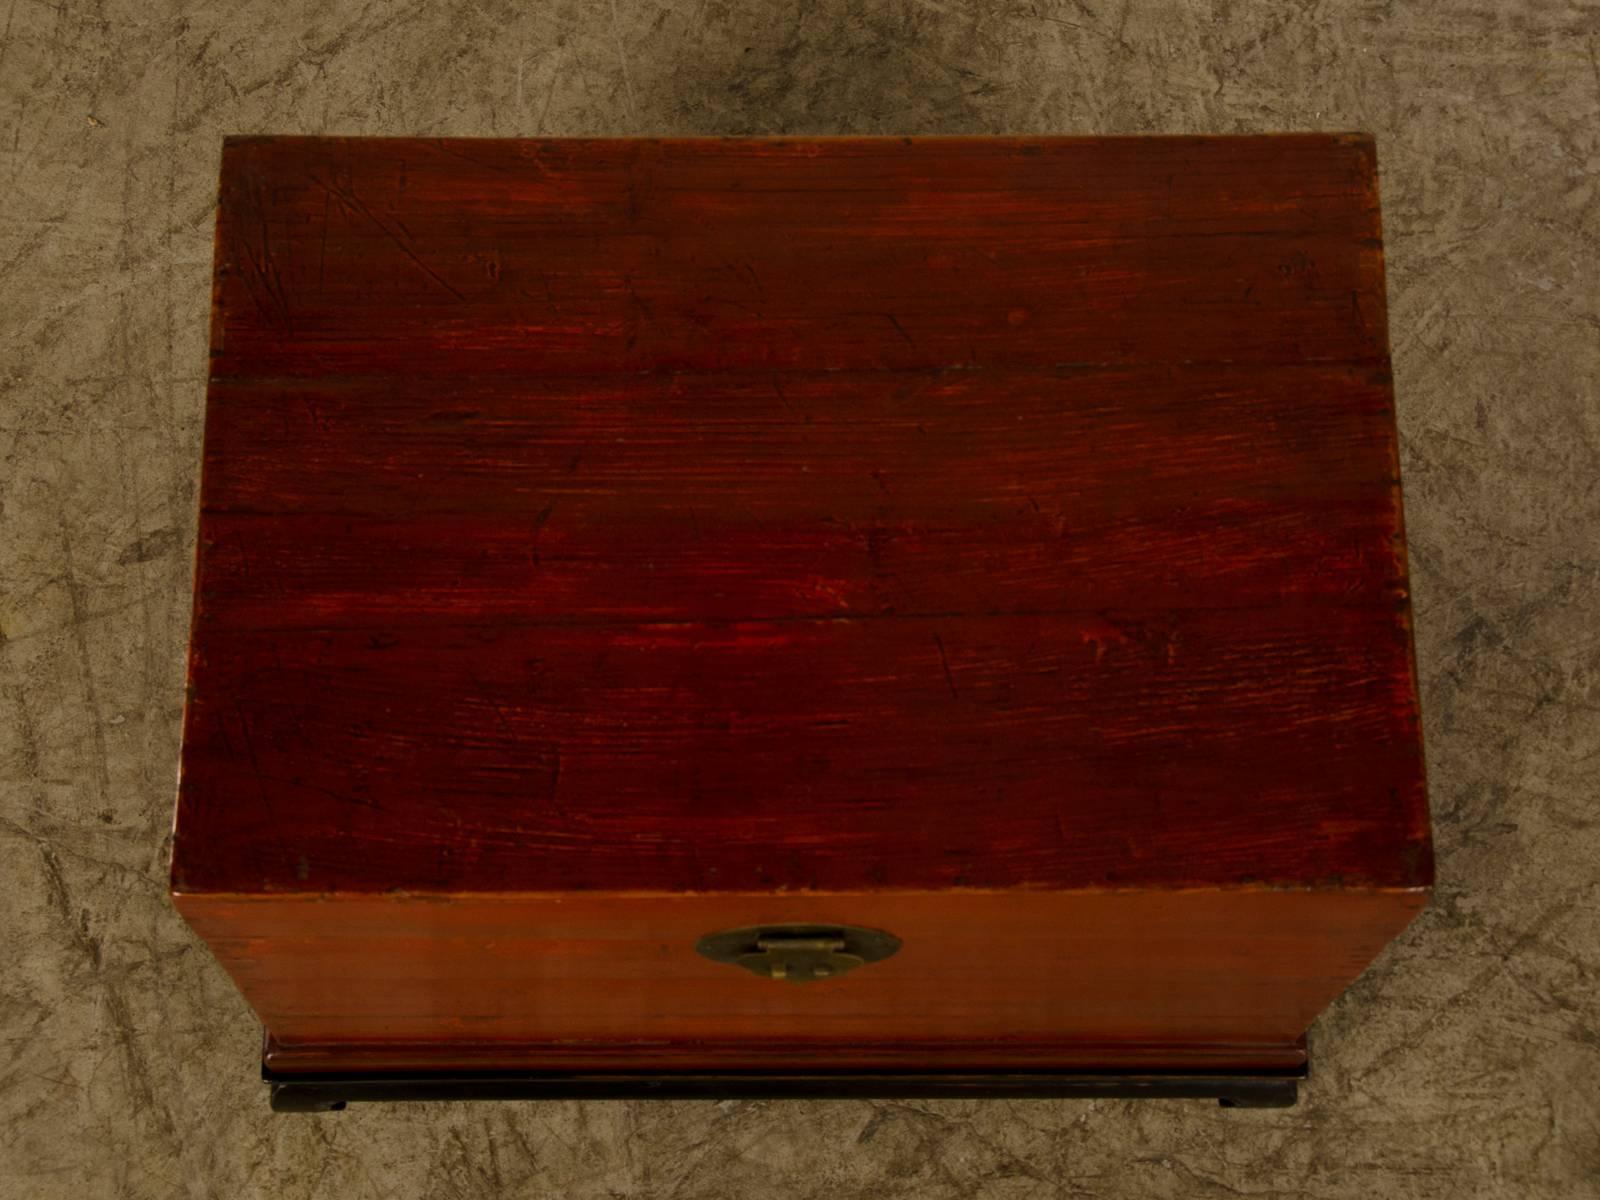 Bronzed Red Lacquer Antique Chinese Trunk Kuang Hsu Period China, circa 1875